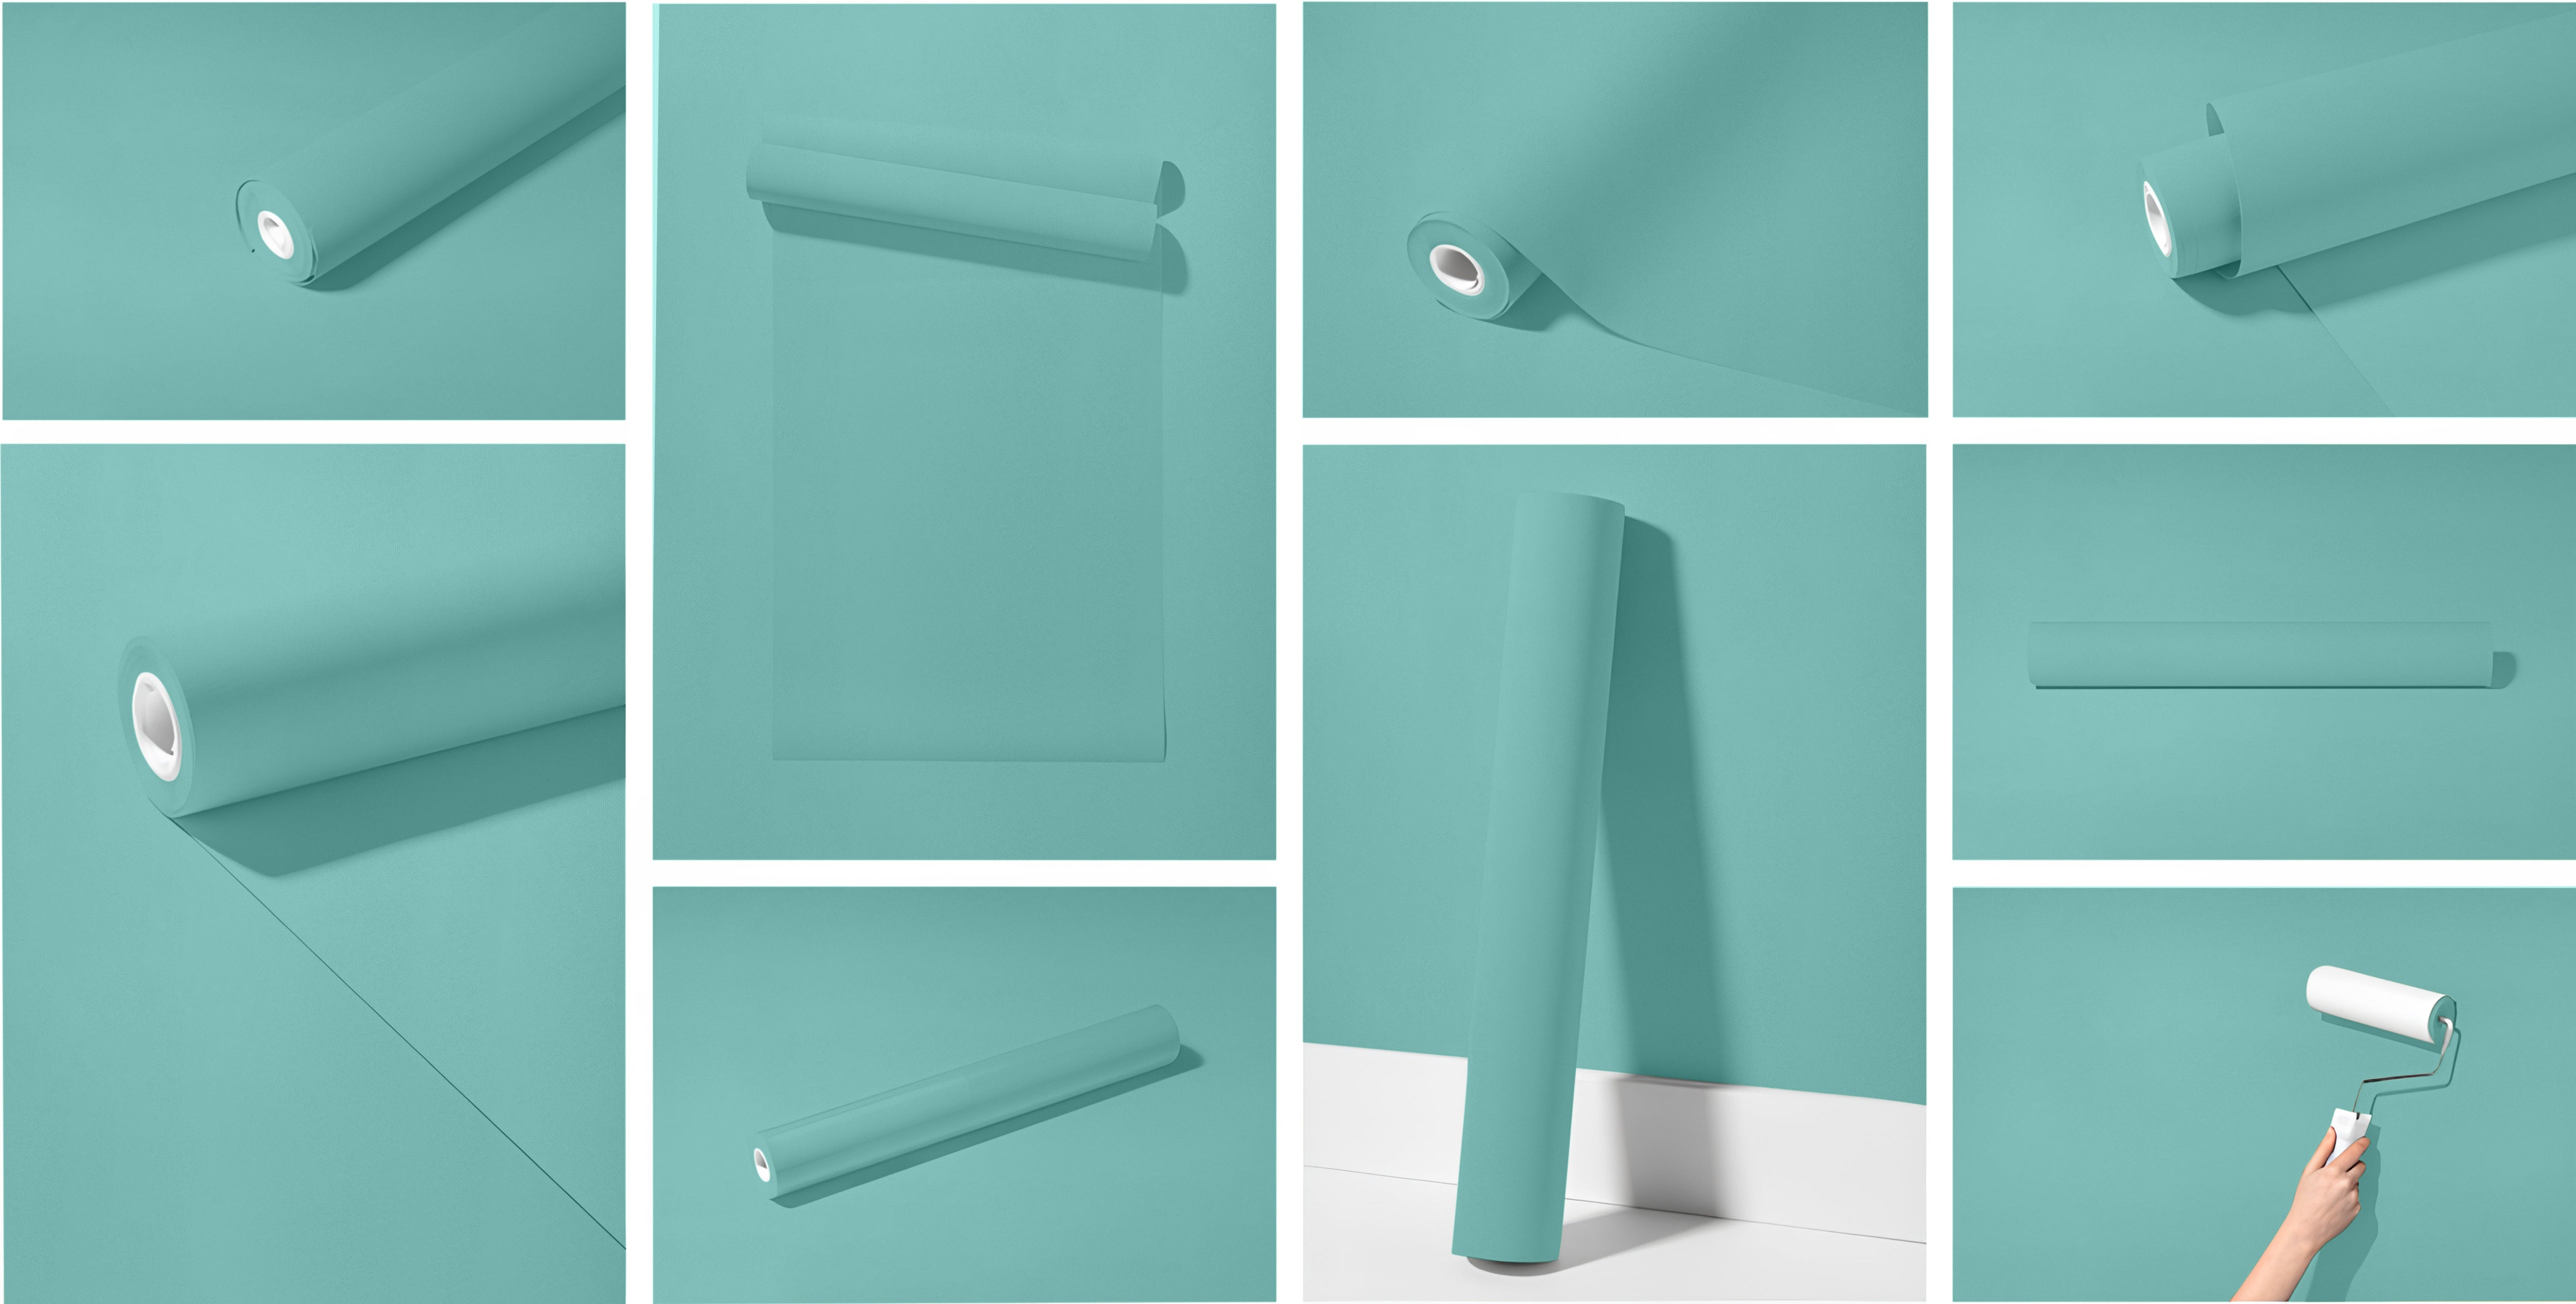 Peel & Stick Removable Re-usable Paint - Color RAL 6027 Light Green - offRAL™ - RALRAW LLC, USA